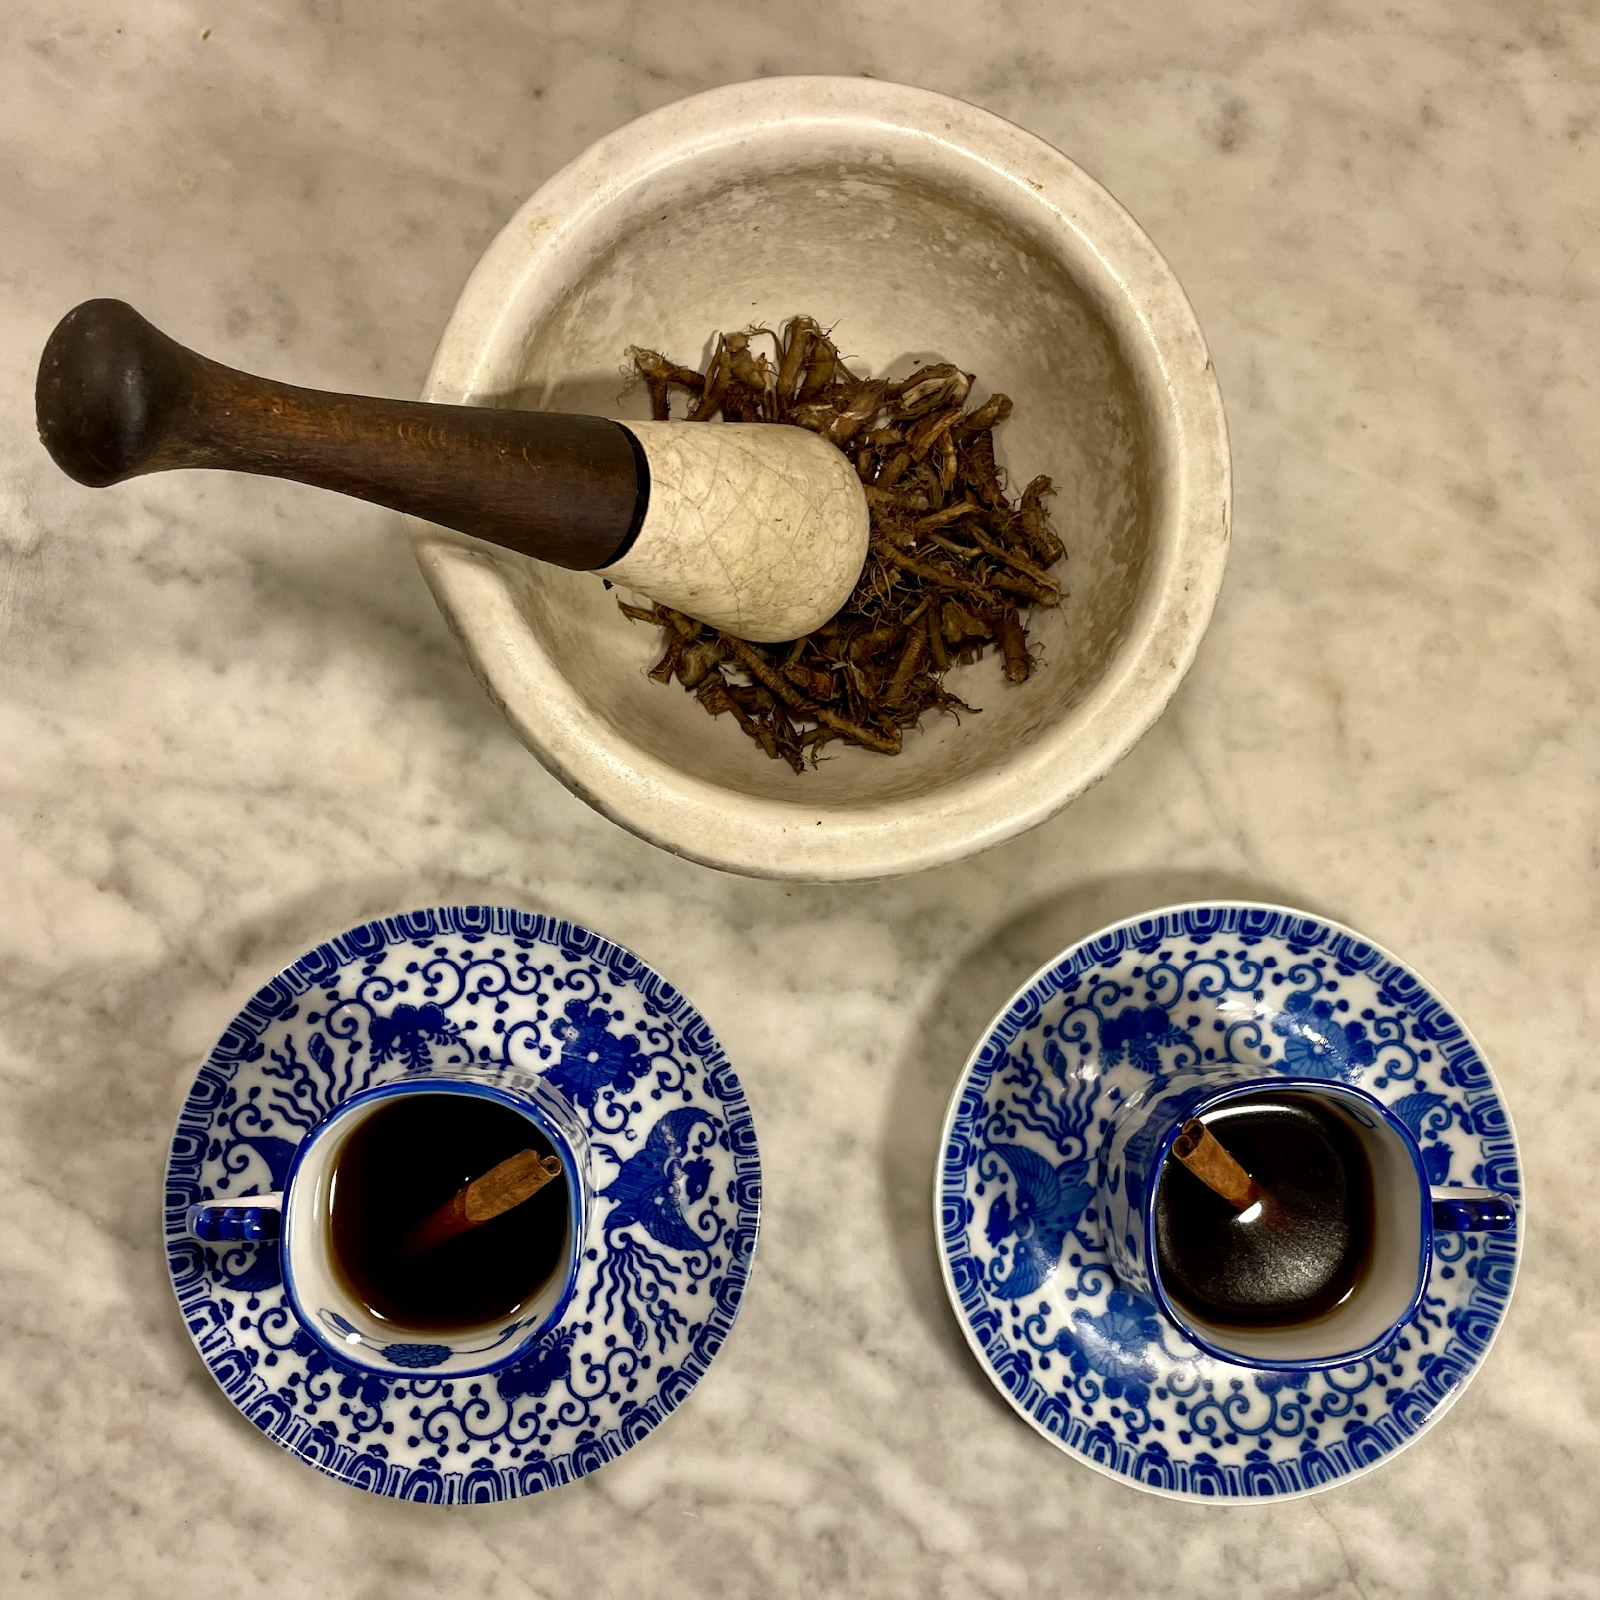  Roasted dandelion root coffee ground in mortar and pestle with cinnamon
 